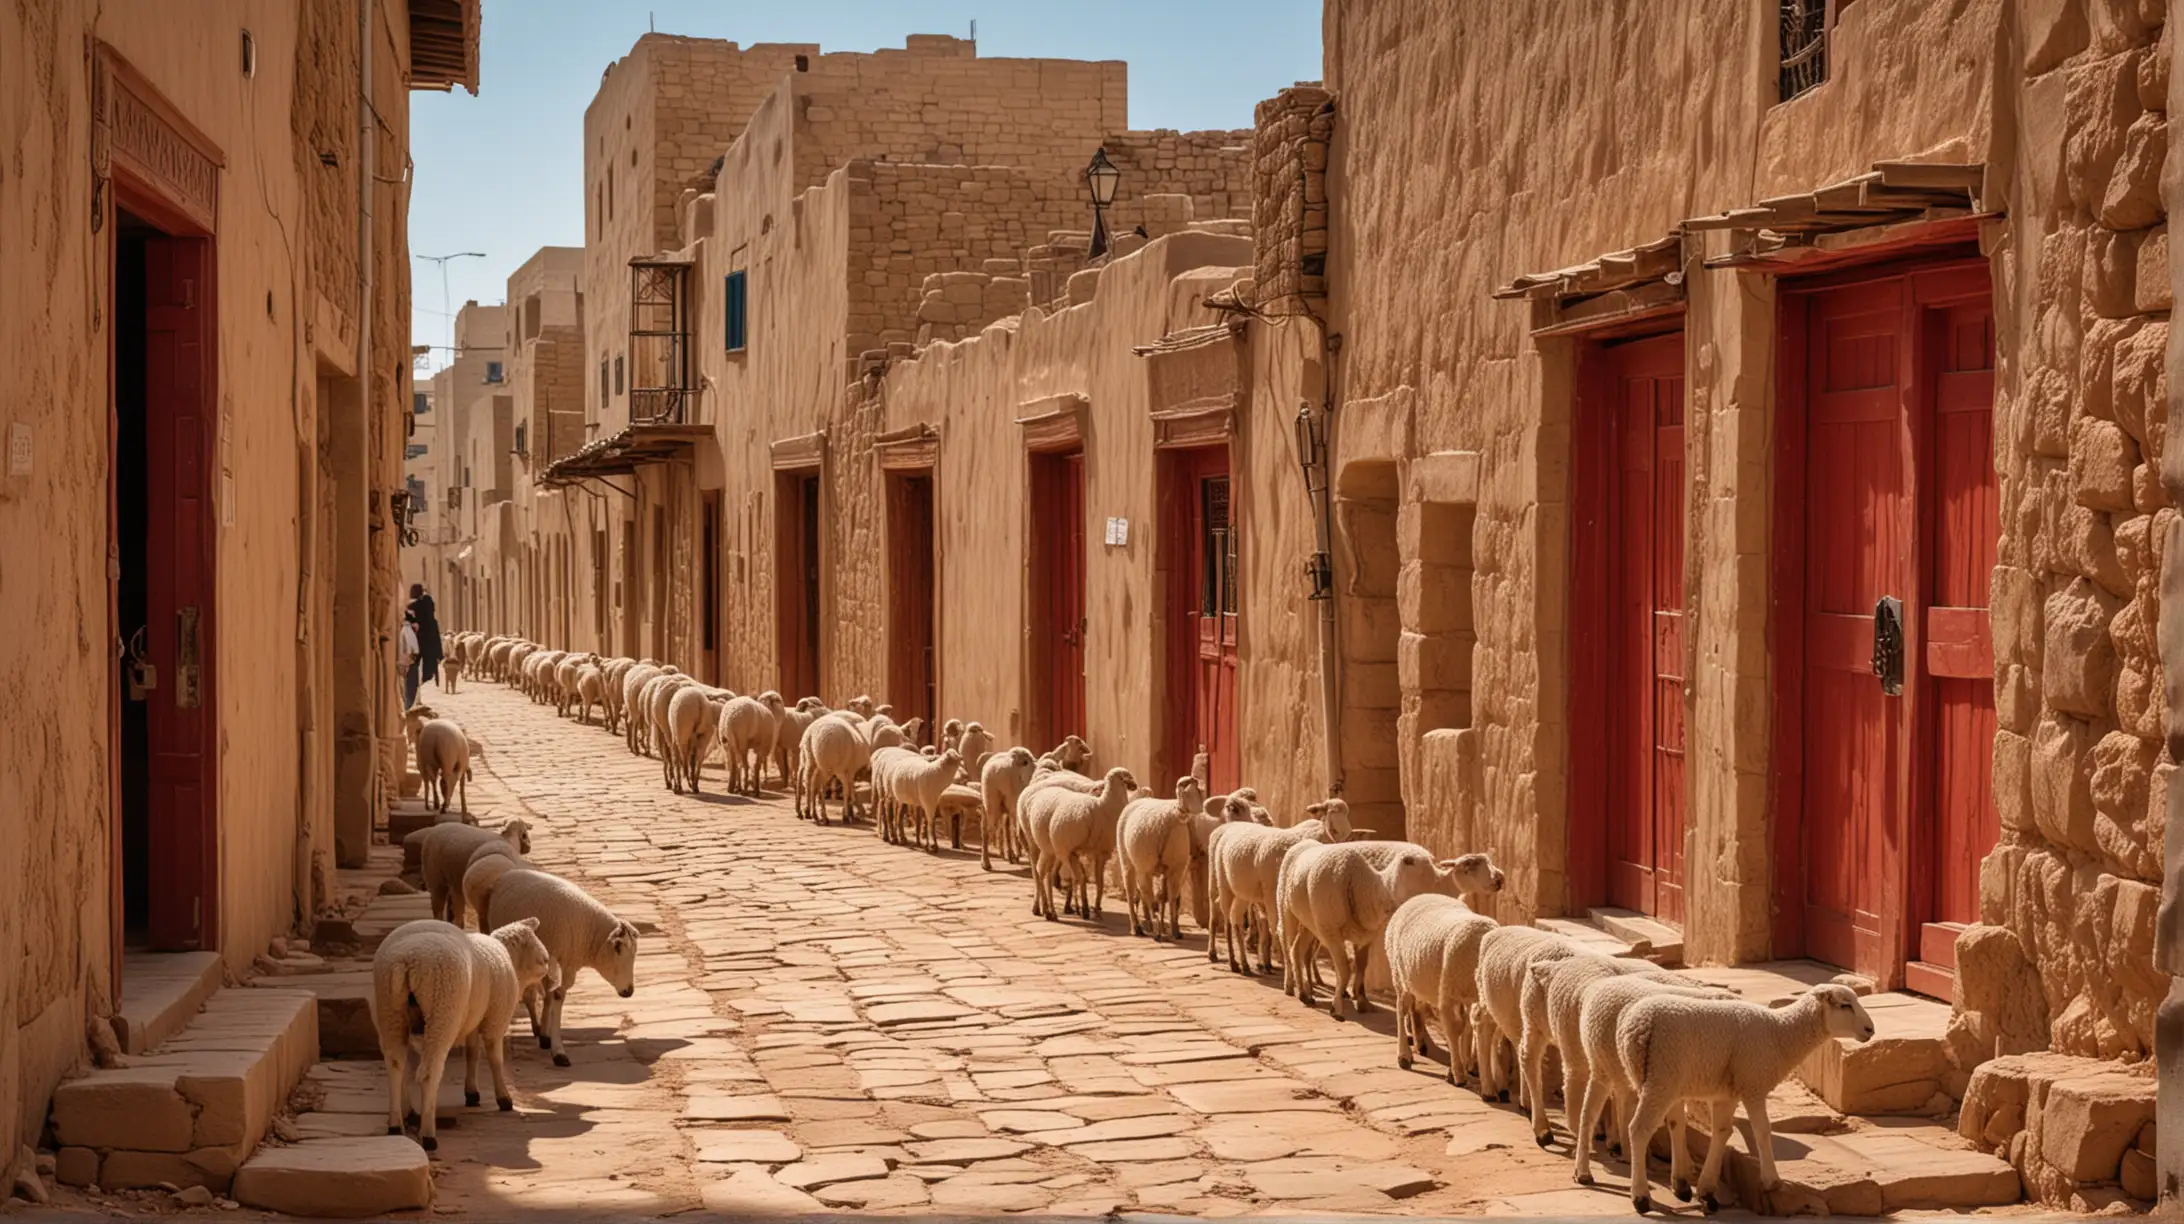 a main street of a Middle Eastern village, where the lintel of the door and it's side posts, are all red,  a few lambs in the street, and people busy with passover preparations,  during the era of the Biblical Moses.